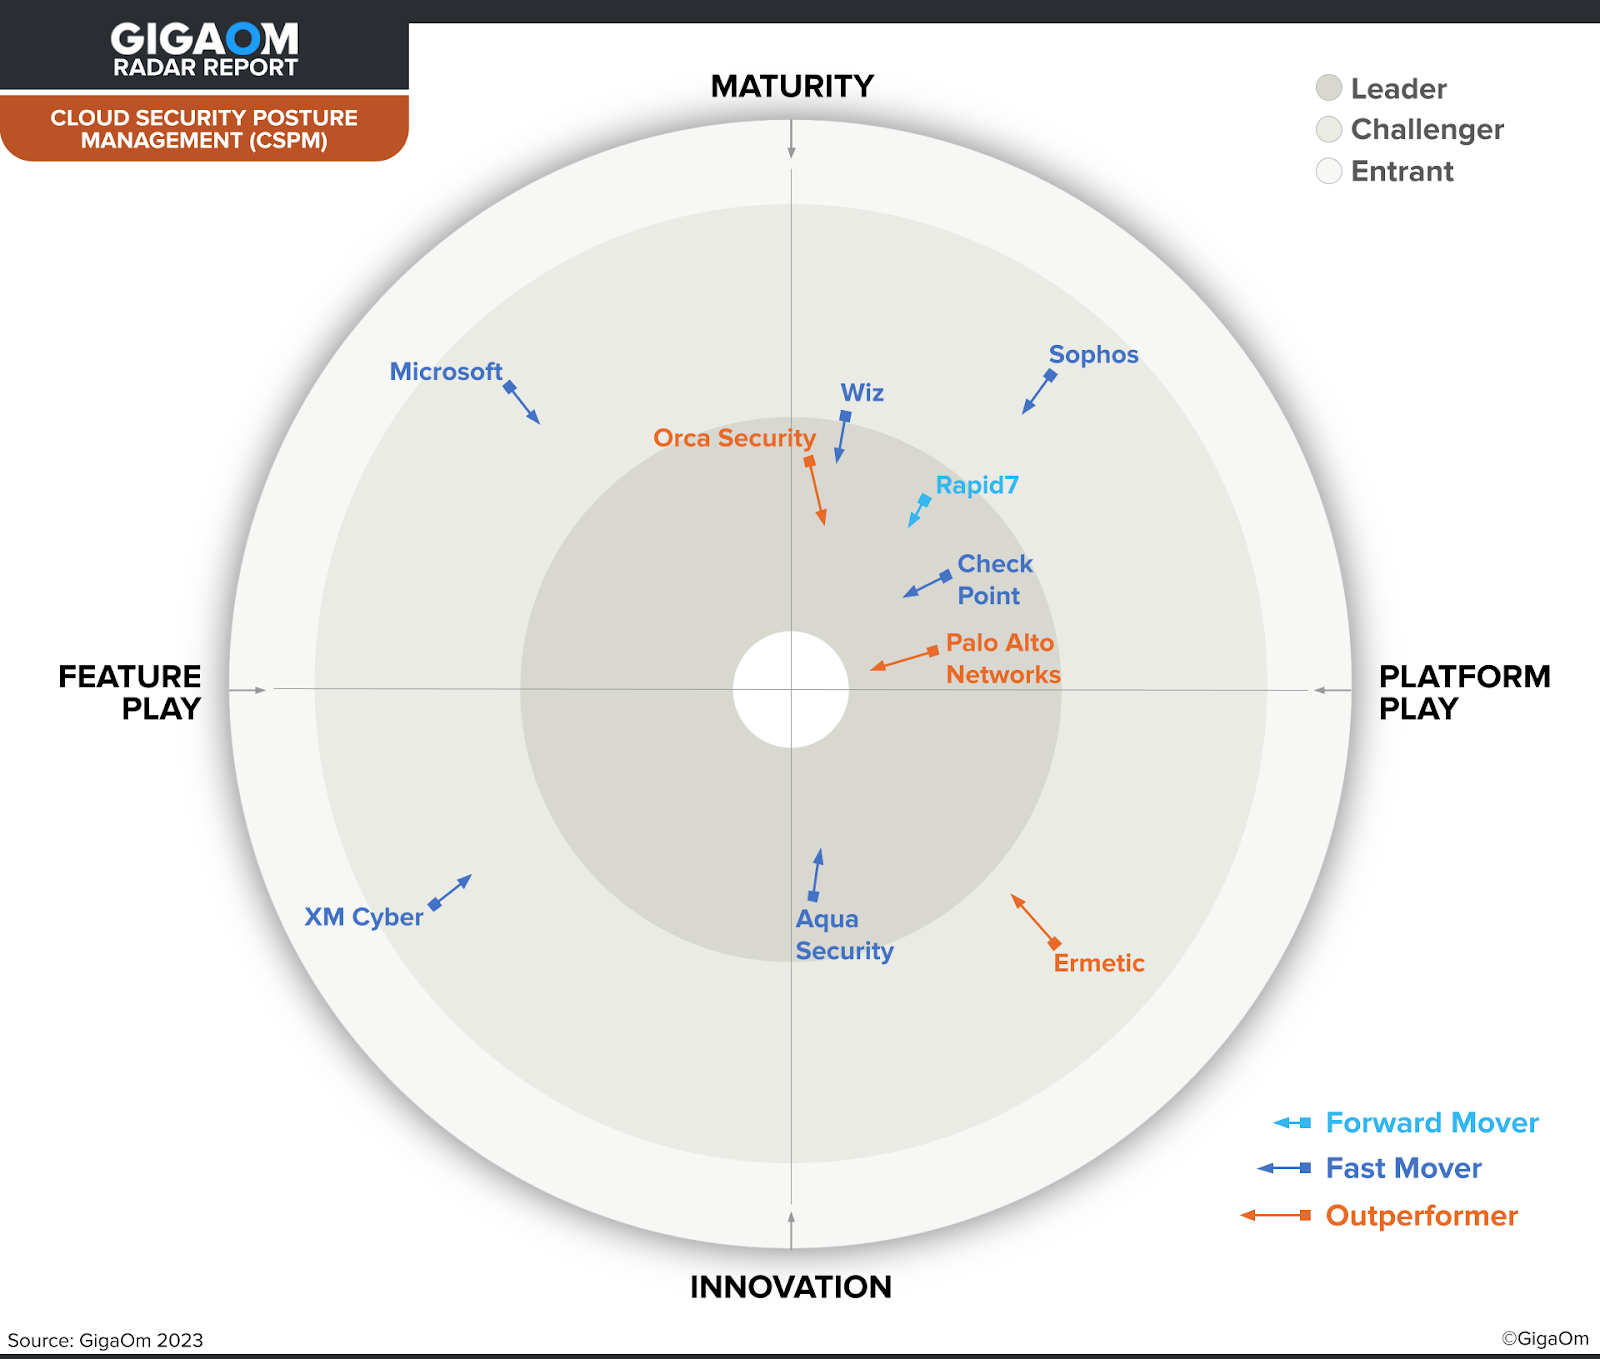 Orca Security is shown as a Leader within the center ring of the above diagram against other vendors. 